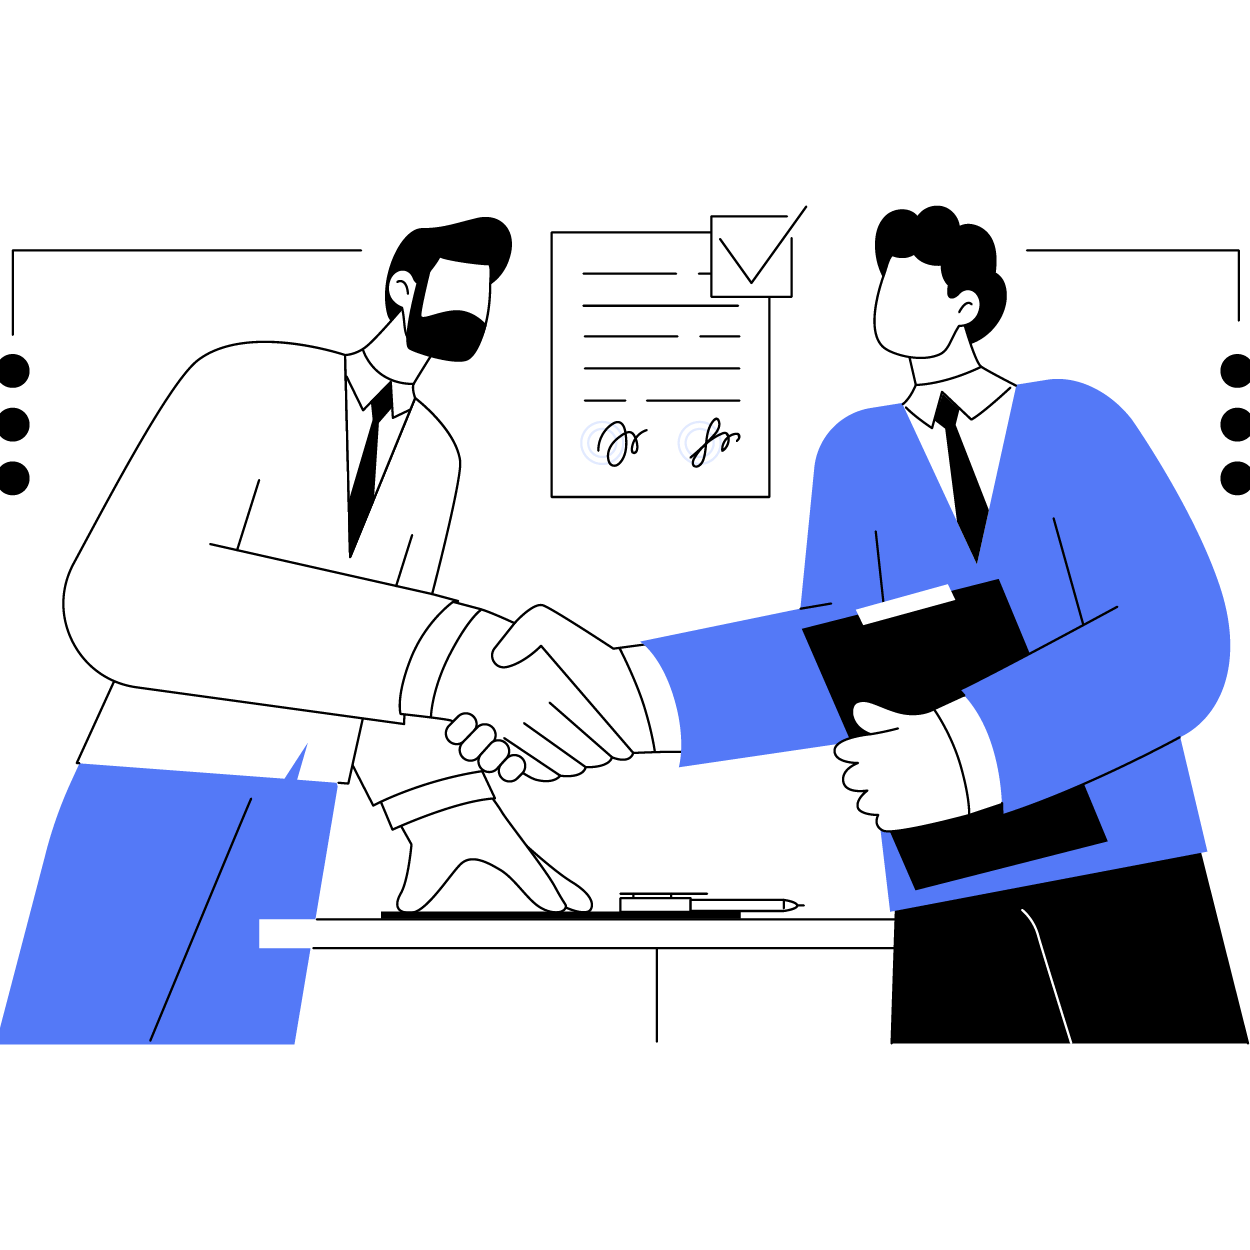 Modern graphic in black, white, and indigo of two males shaking hands across a table in agreement